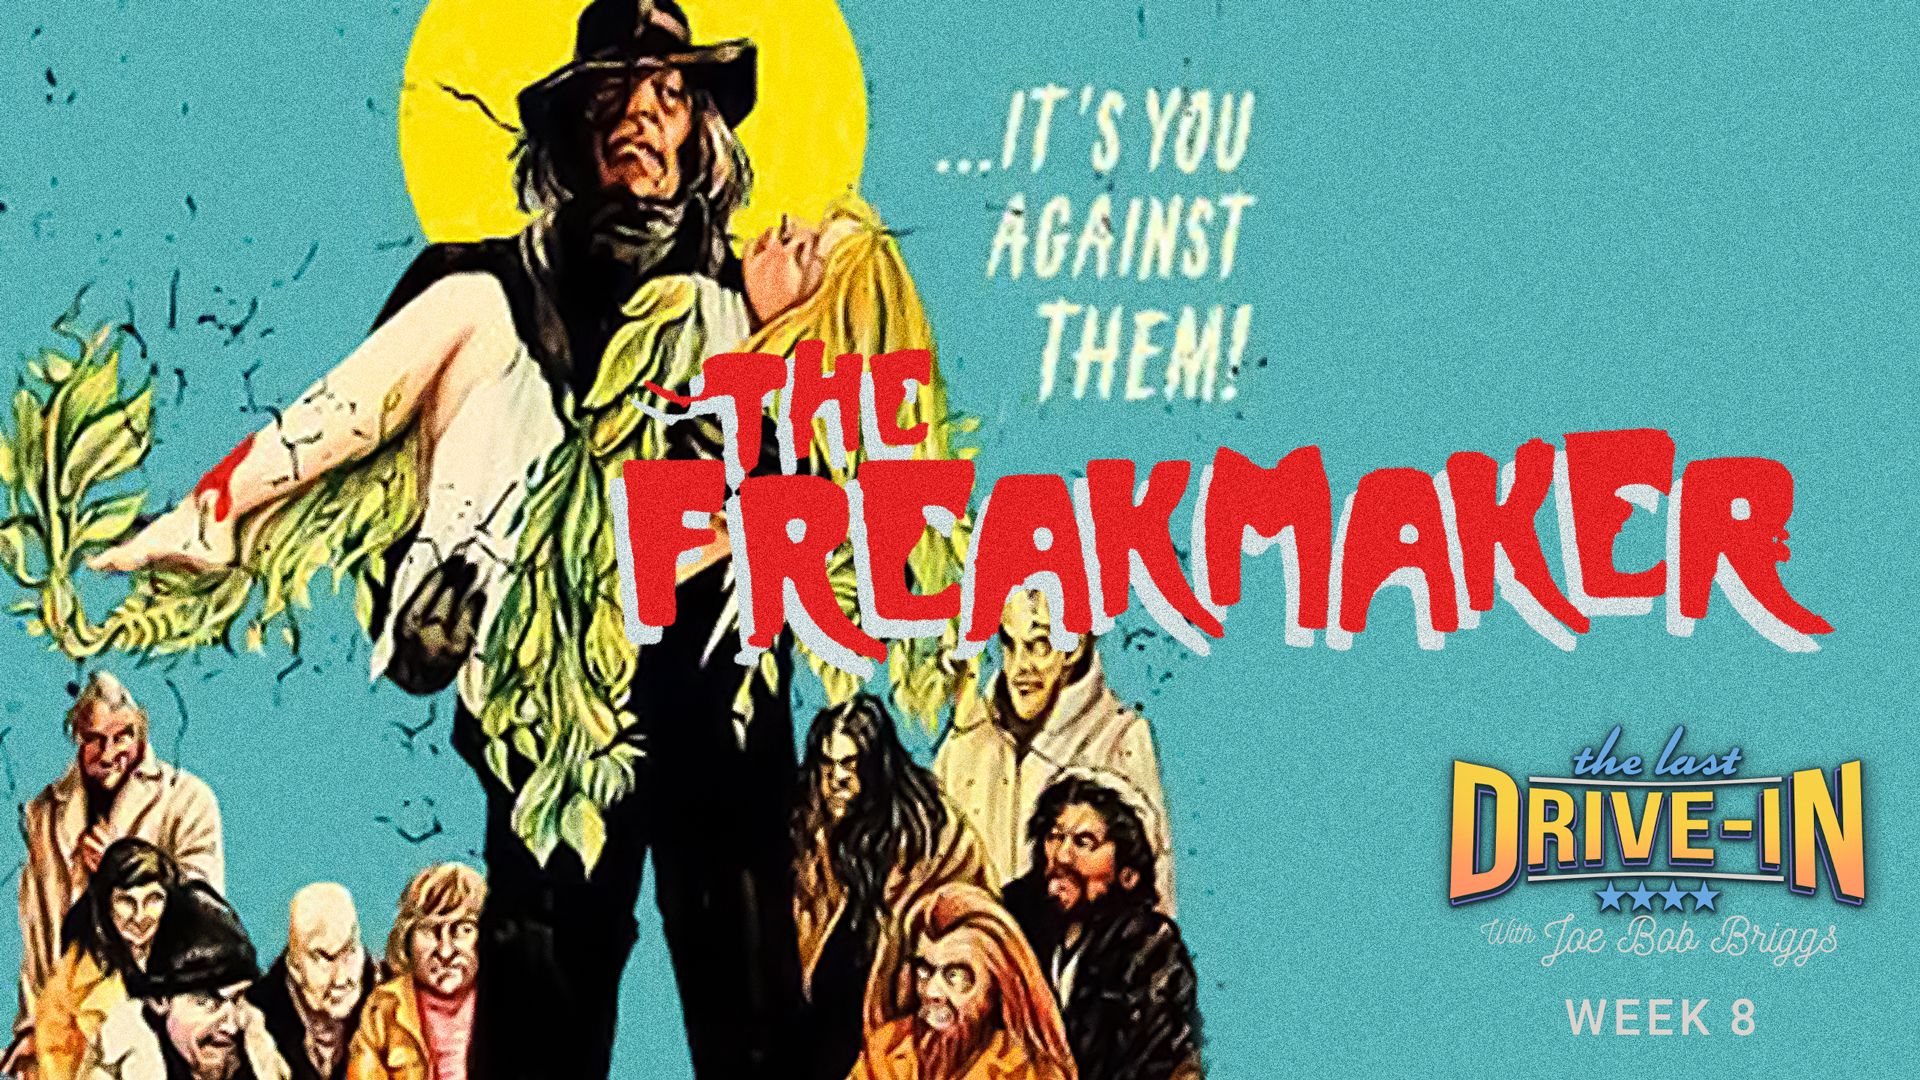 The Freakmaker, A science professor believes it is man's destiny to survive an uncertain future by evolving into a hybrid plant/human mutation., TV-MA, Season 1053667, Episode 16